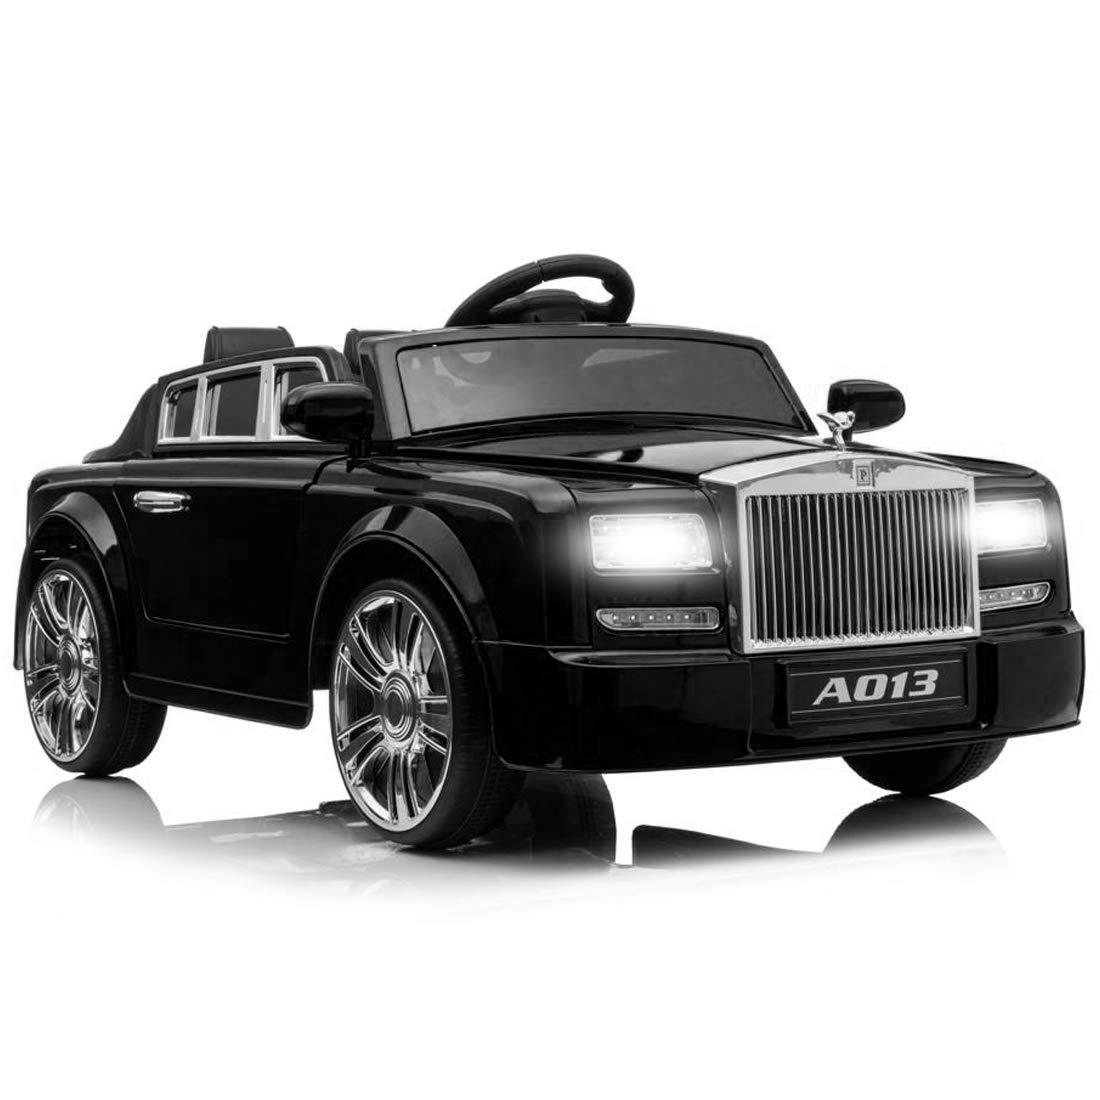 Rolls Royce Toy Car Remote Control: Remote Controlled Rolls Royce Toy Car: Specs and Where to Buy